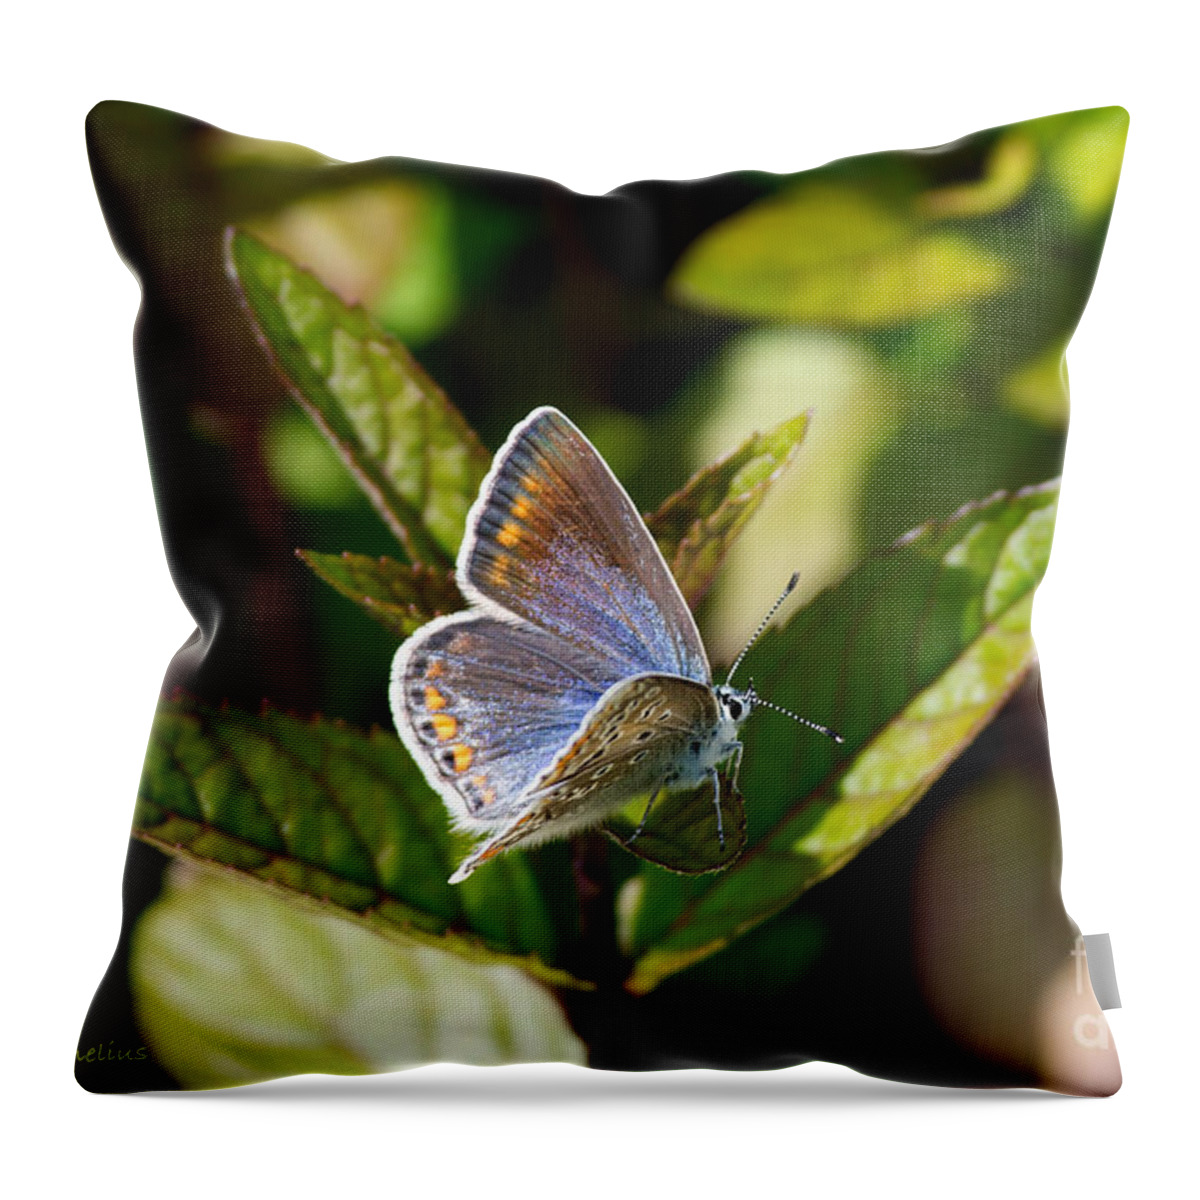 Northern Blue Throw Pillow featuring the photograph Northern Blue by Torbjorn Swenelius